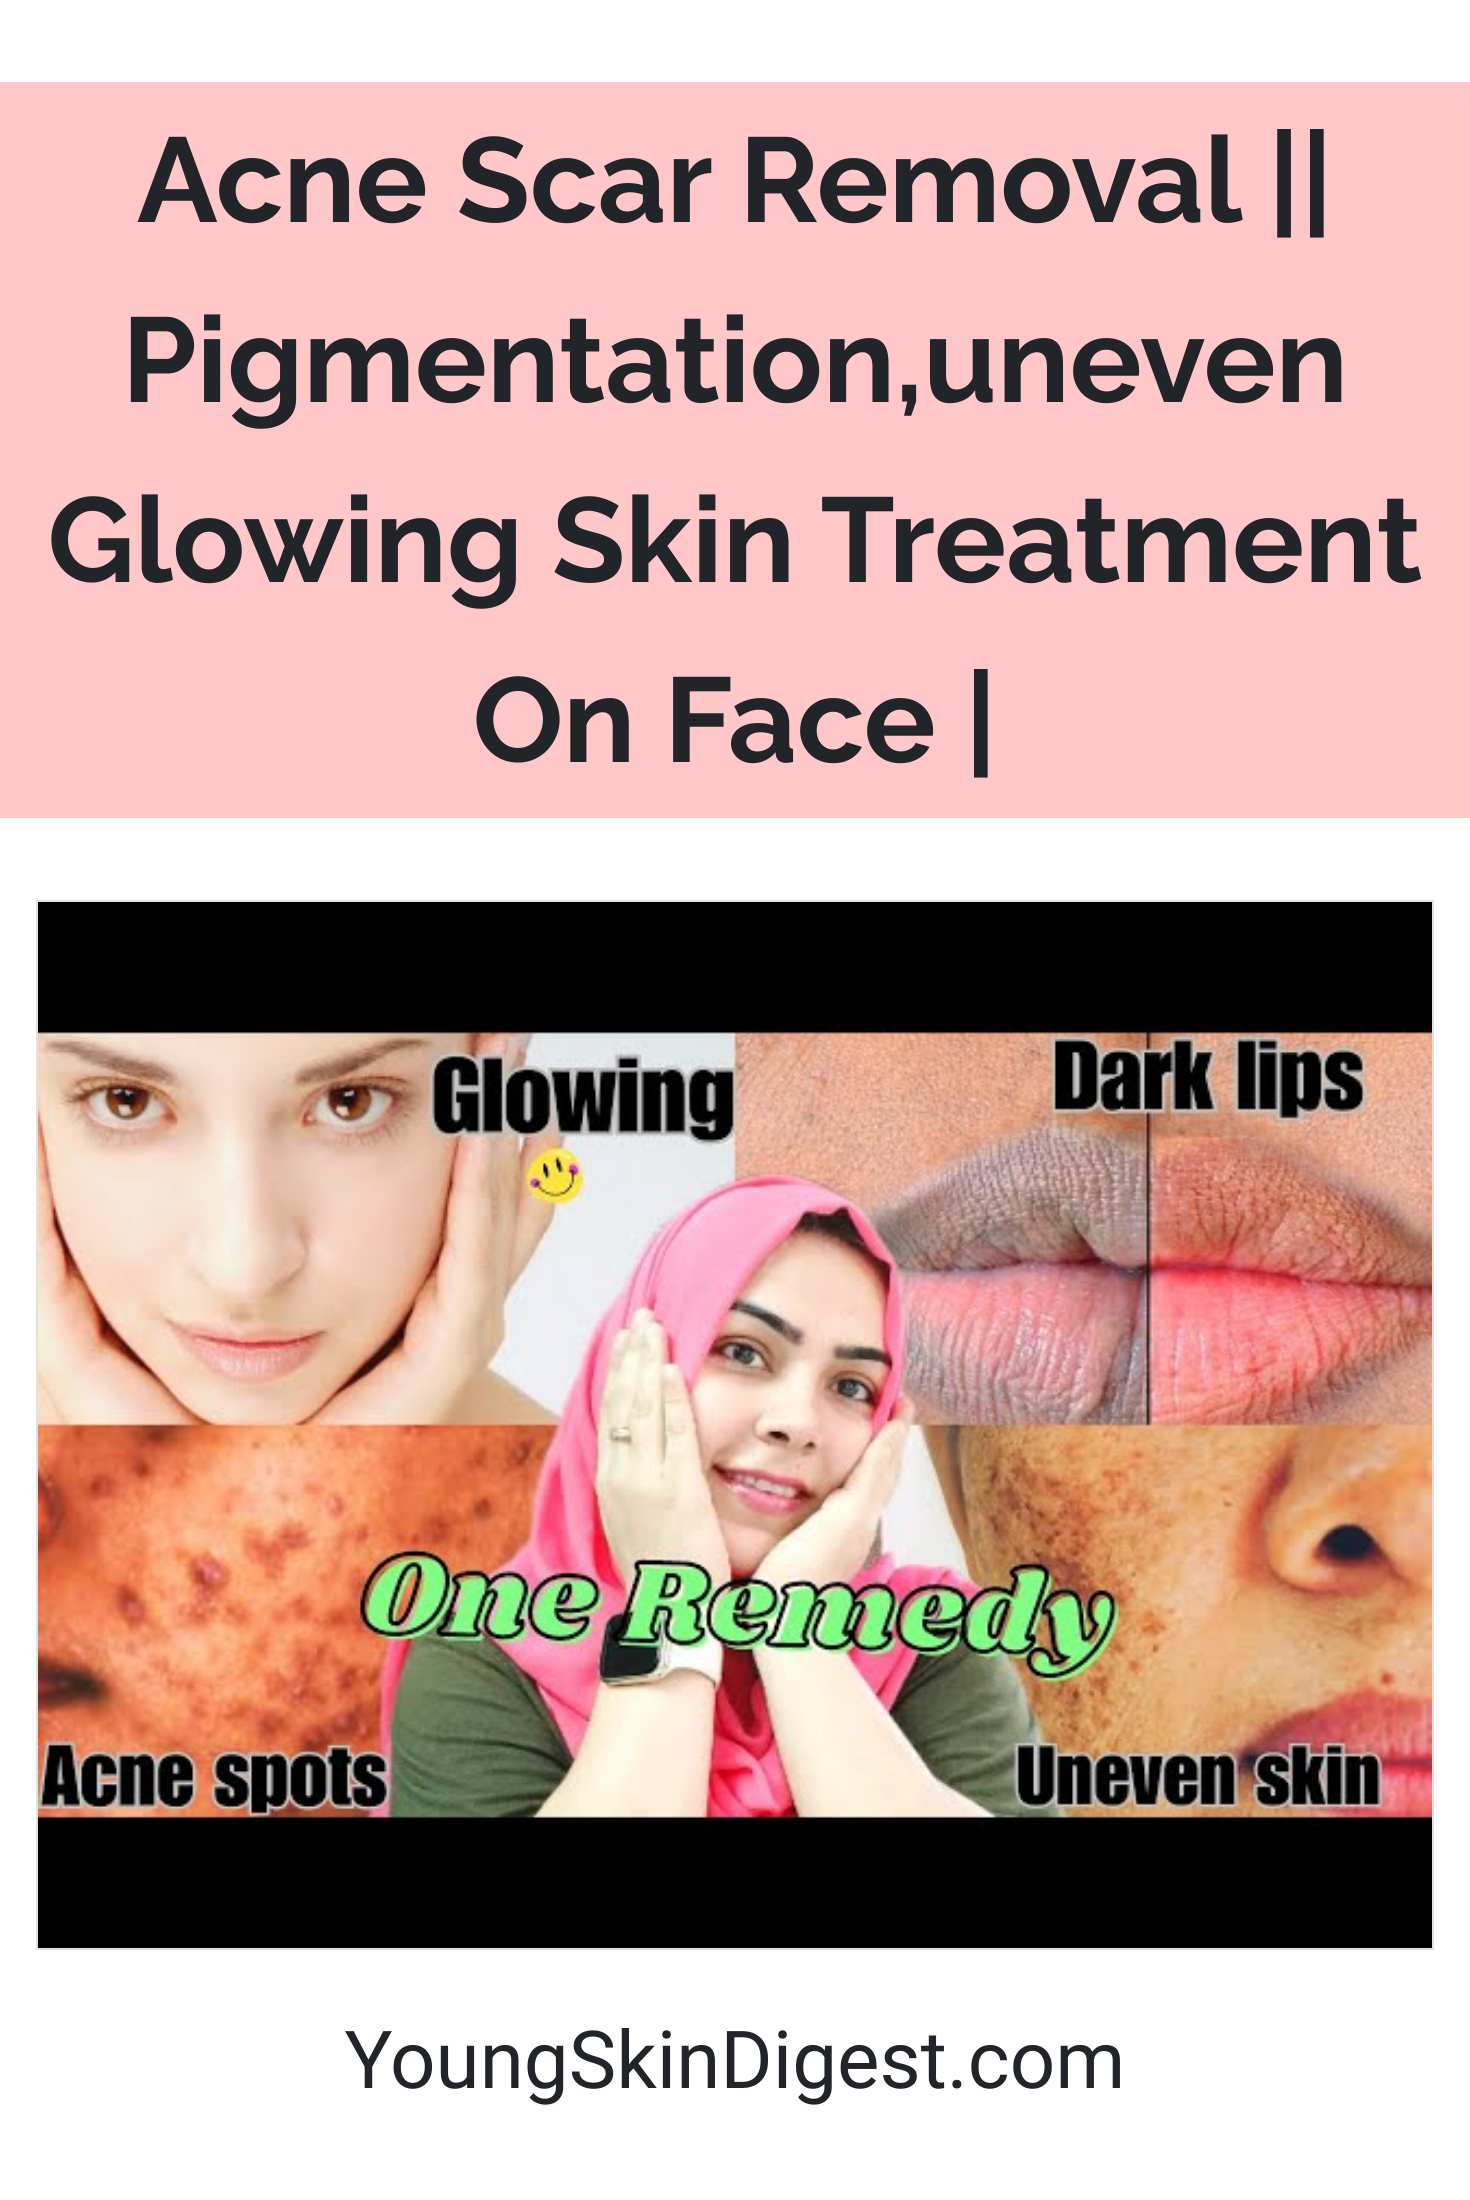 Acne Scar Removal || Pigmentation,uneven Glowing Skin Treatment On Face ...